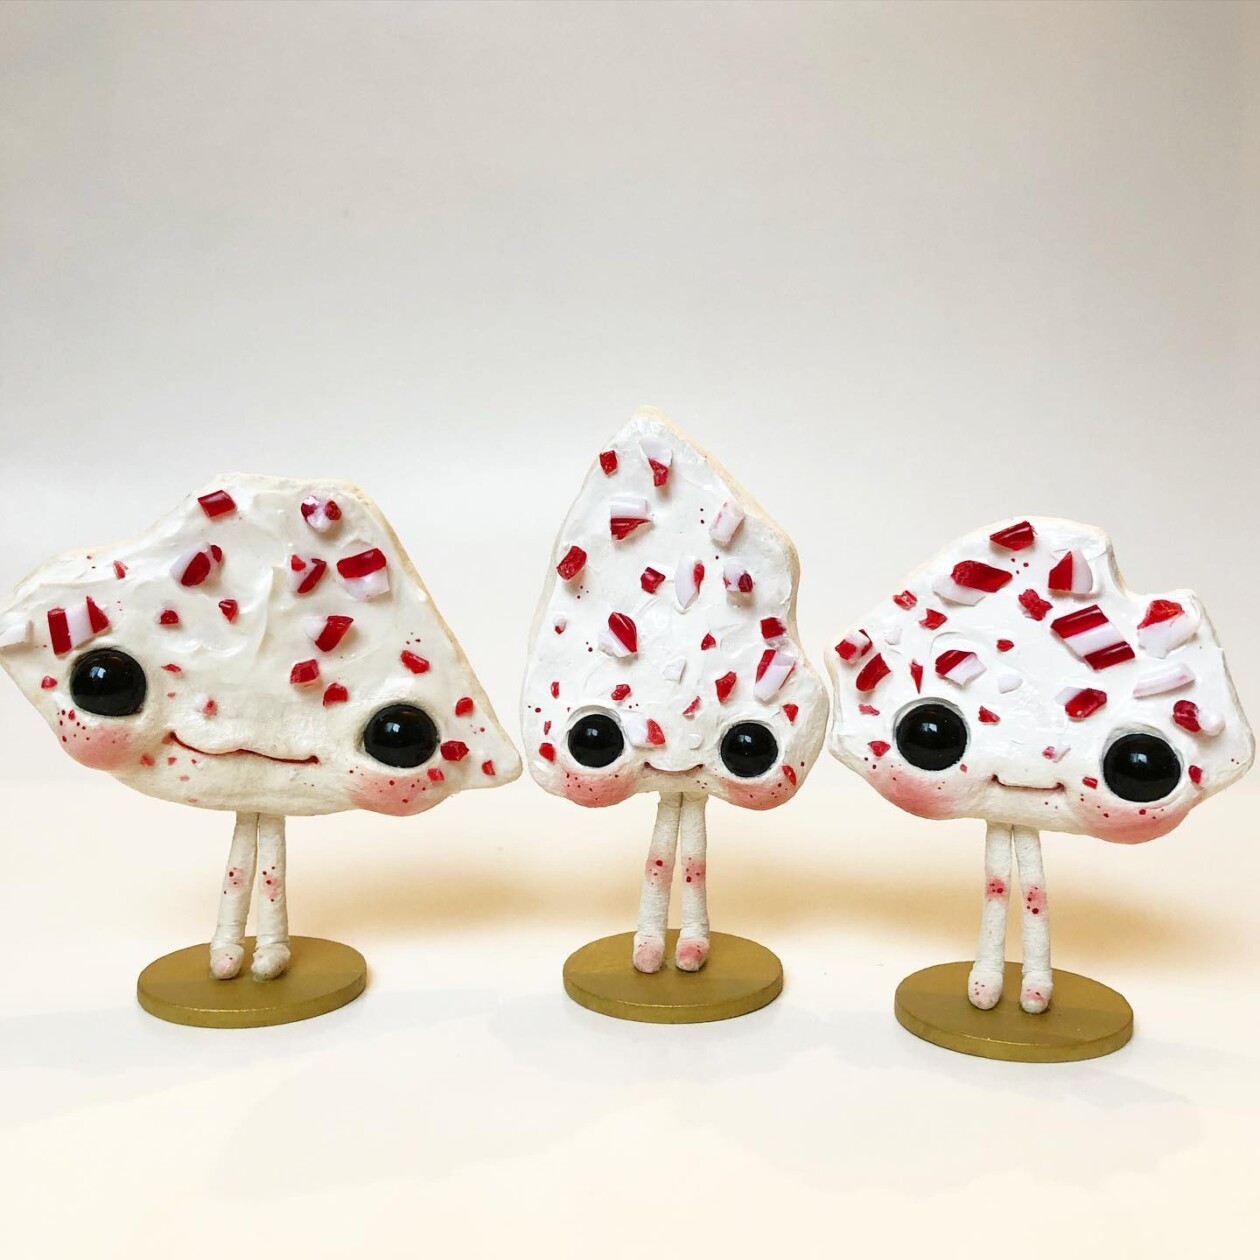 Cute And Creepy Little Monster Toys By Sara Duarte (14)